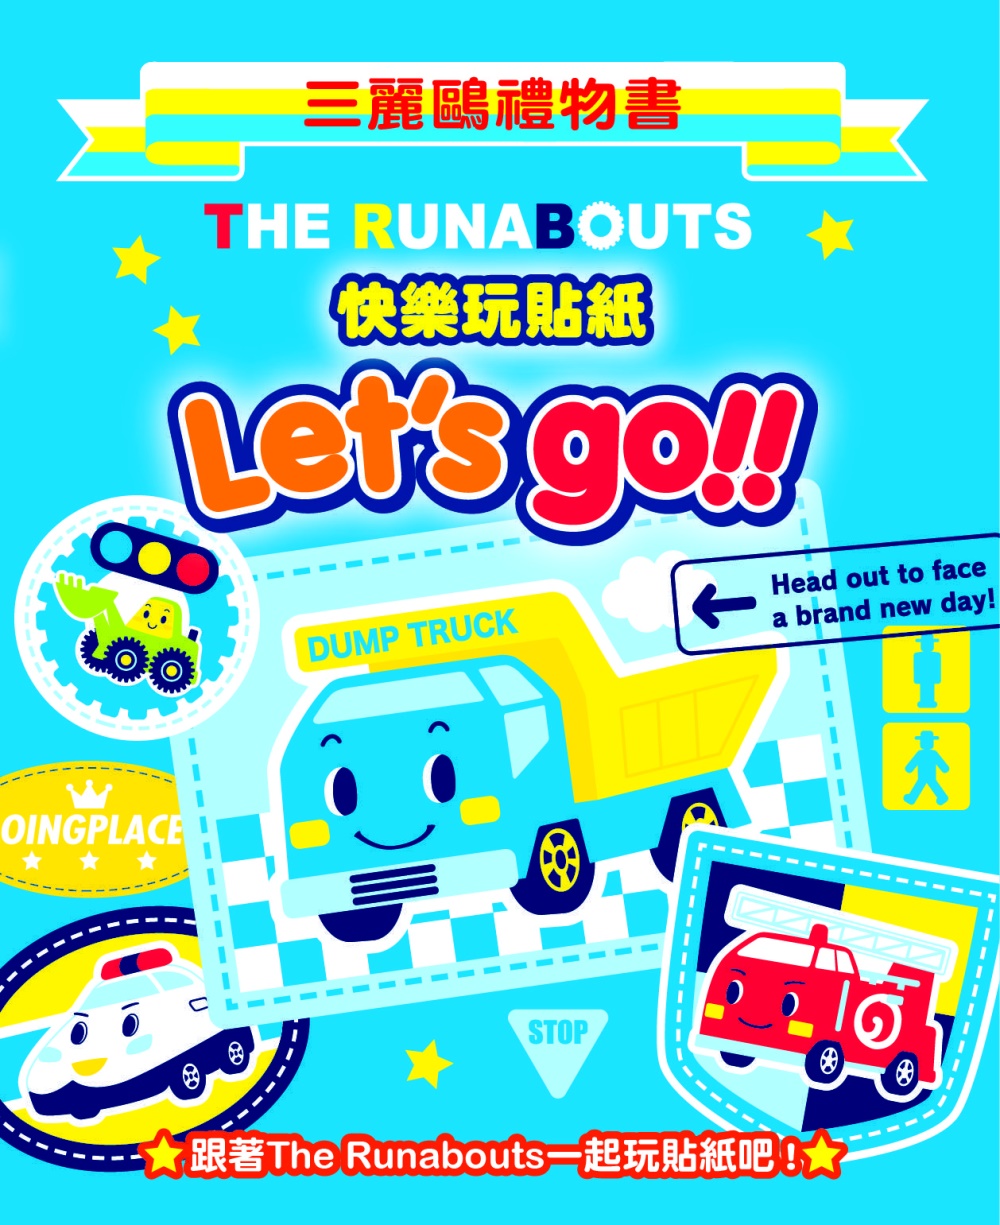 THE RUNABOUTS 快樂玩貼紙 Let’s go !!